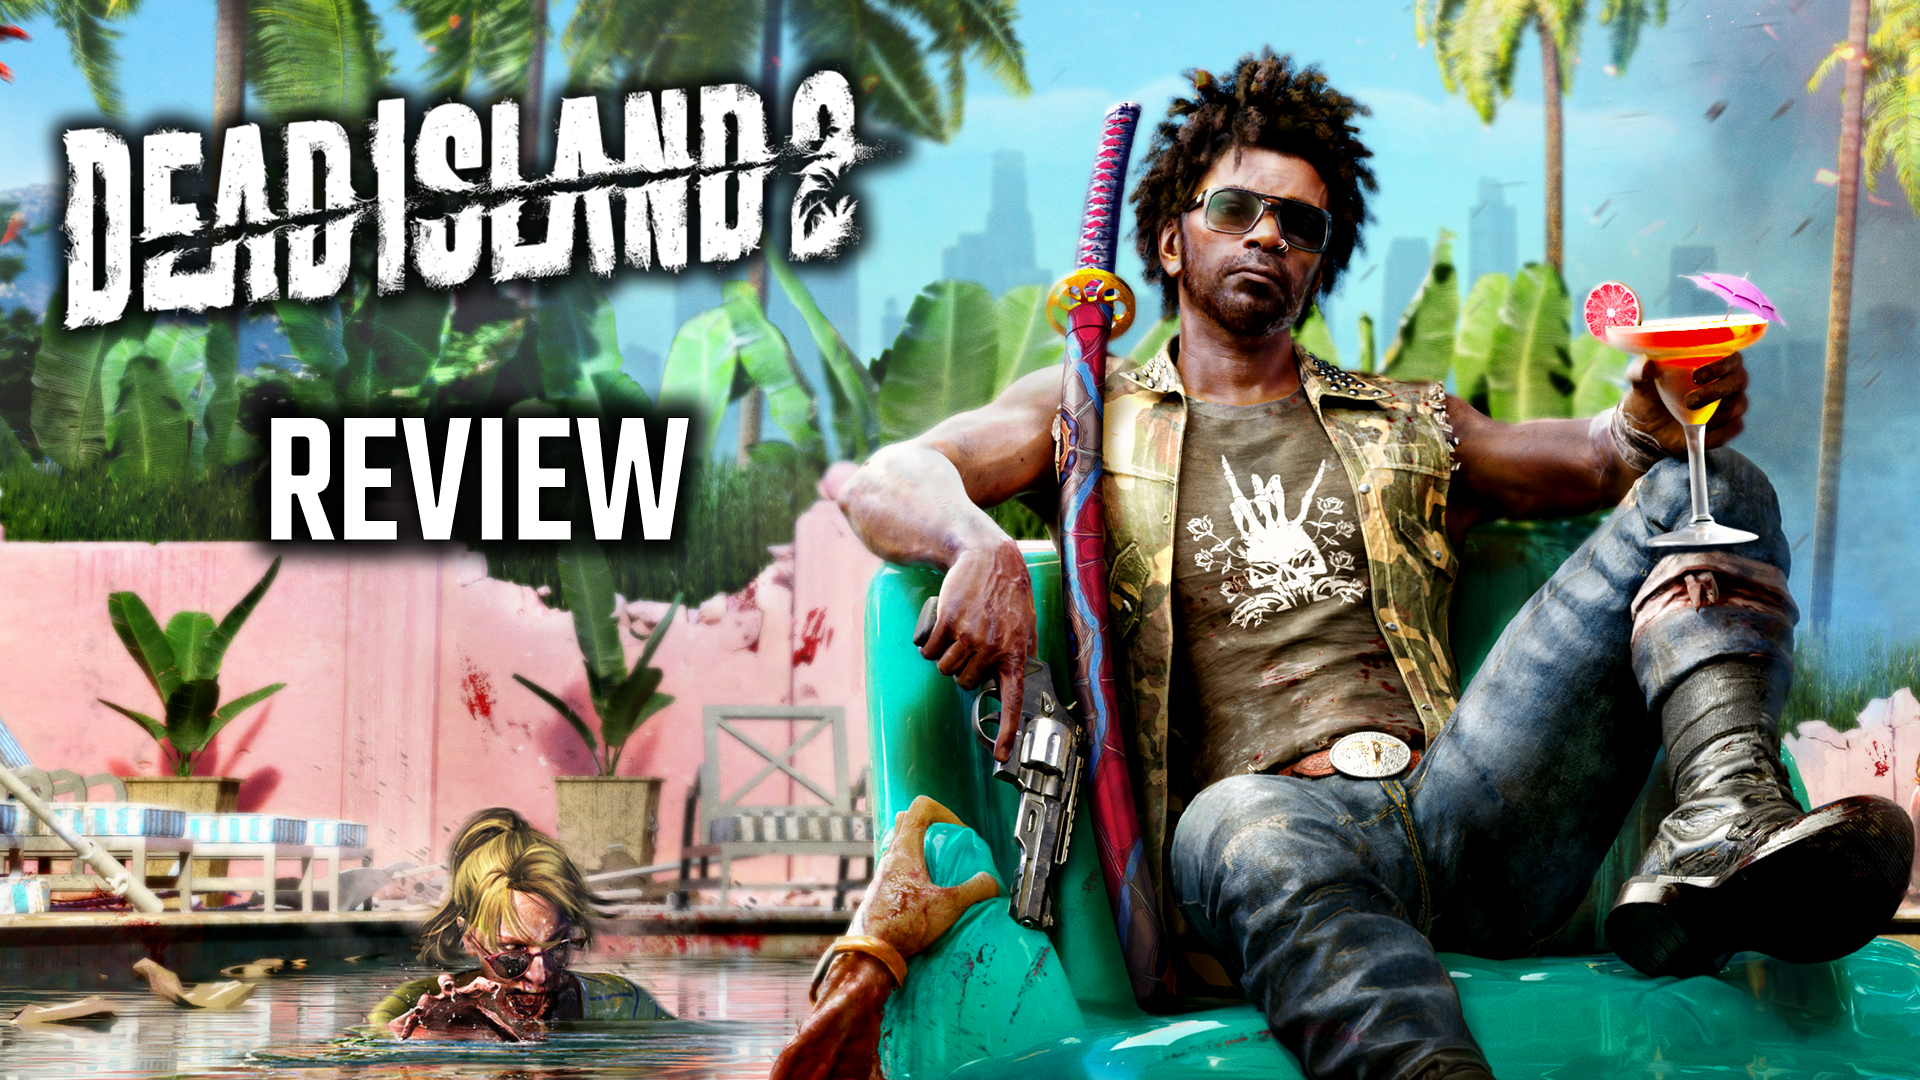 Dead Island 2: How To Play Co-Op With Friends - Cultured Vultures